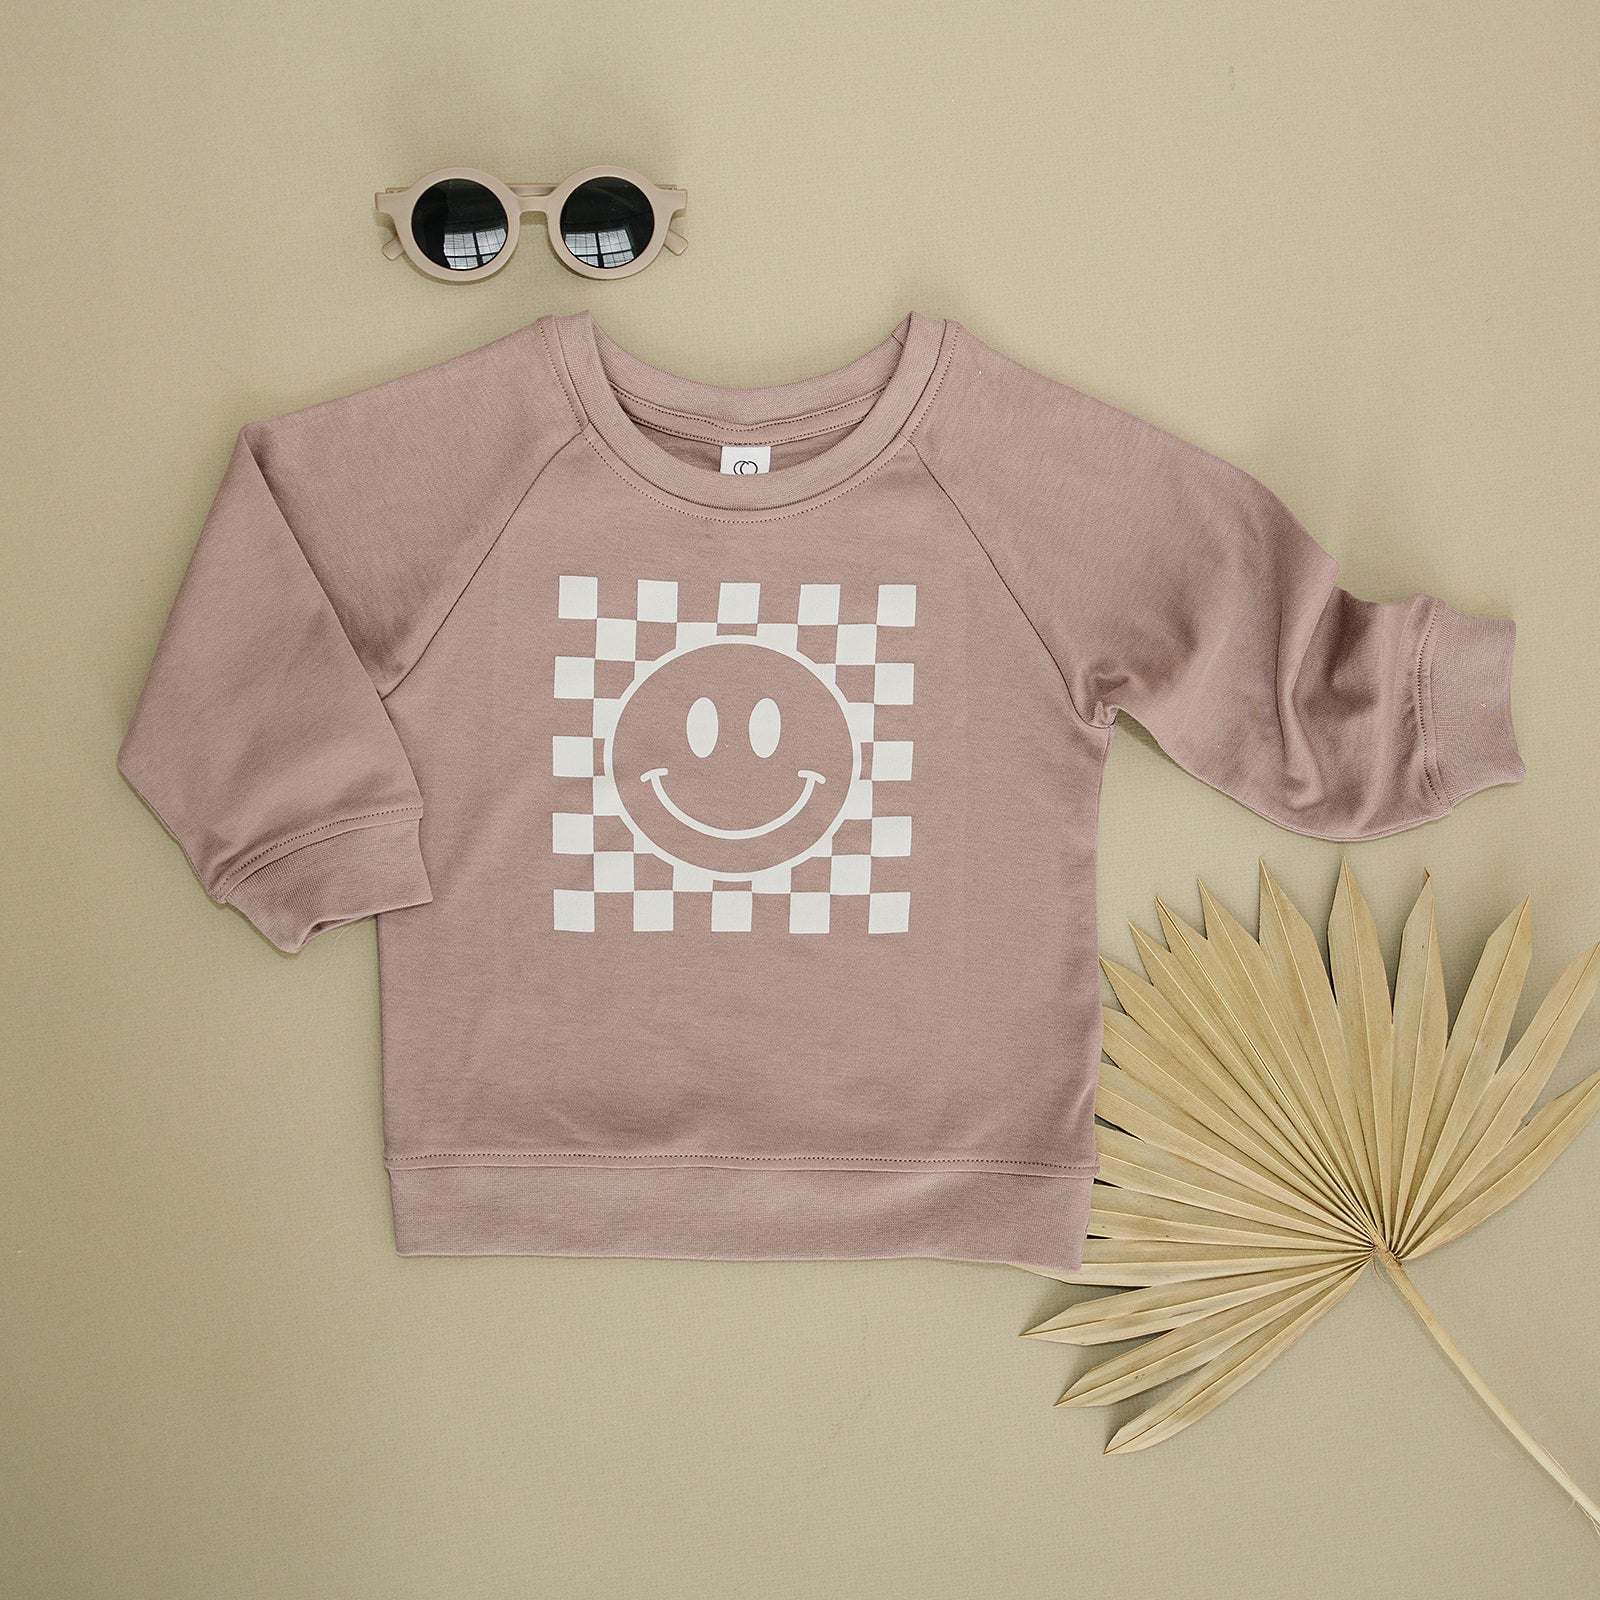 Chic taupe children’s sweatshirt featuring a white checkered smiley face, displayed with a pair of round sunglasses and a dried palm leaf on a khaki background